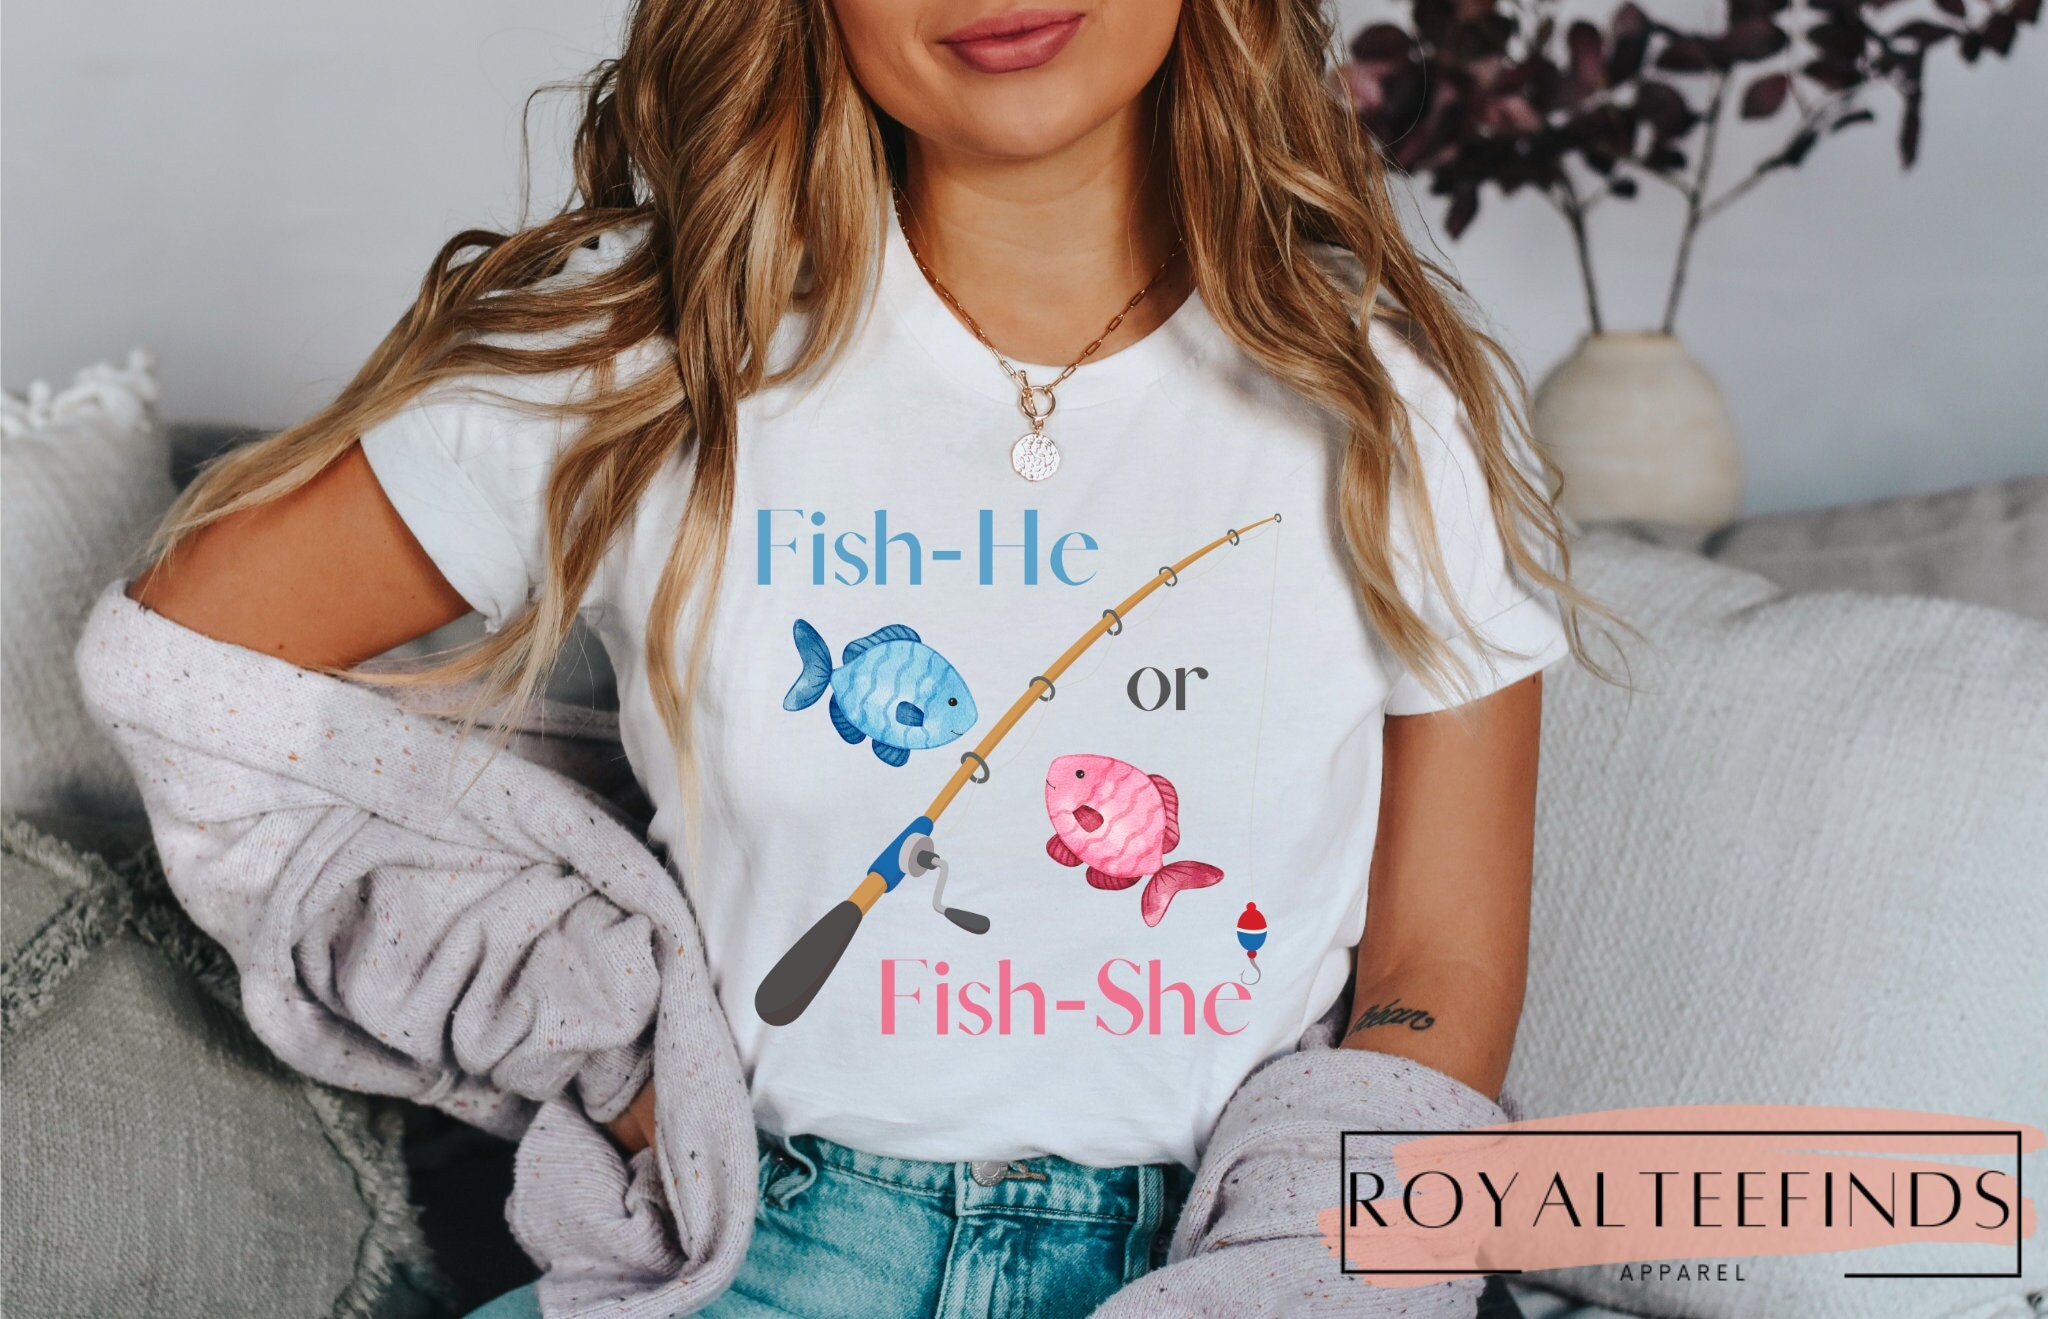 Fishing Gender Reveal Shirt, Fis-He or Fi-She Shirt, Fishing Theme Baby Shower, Keeper of The Gender Tee, Cute Pregnancy Announcement Party